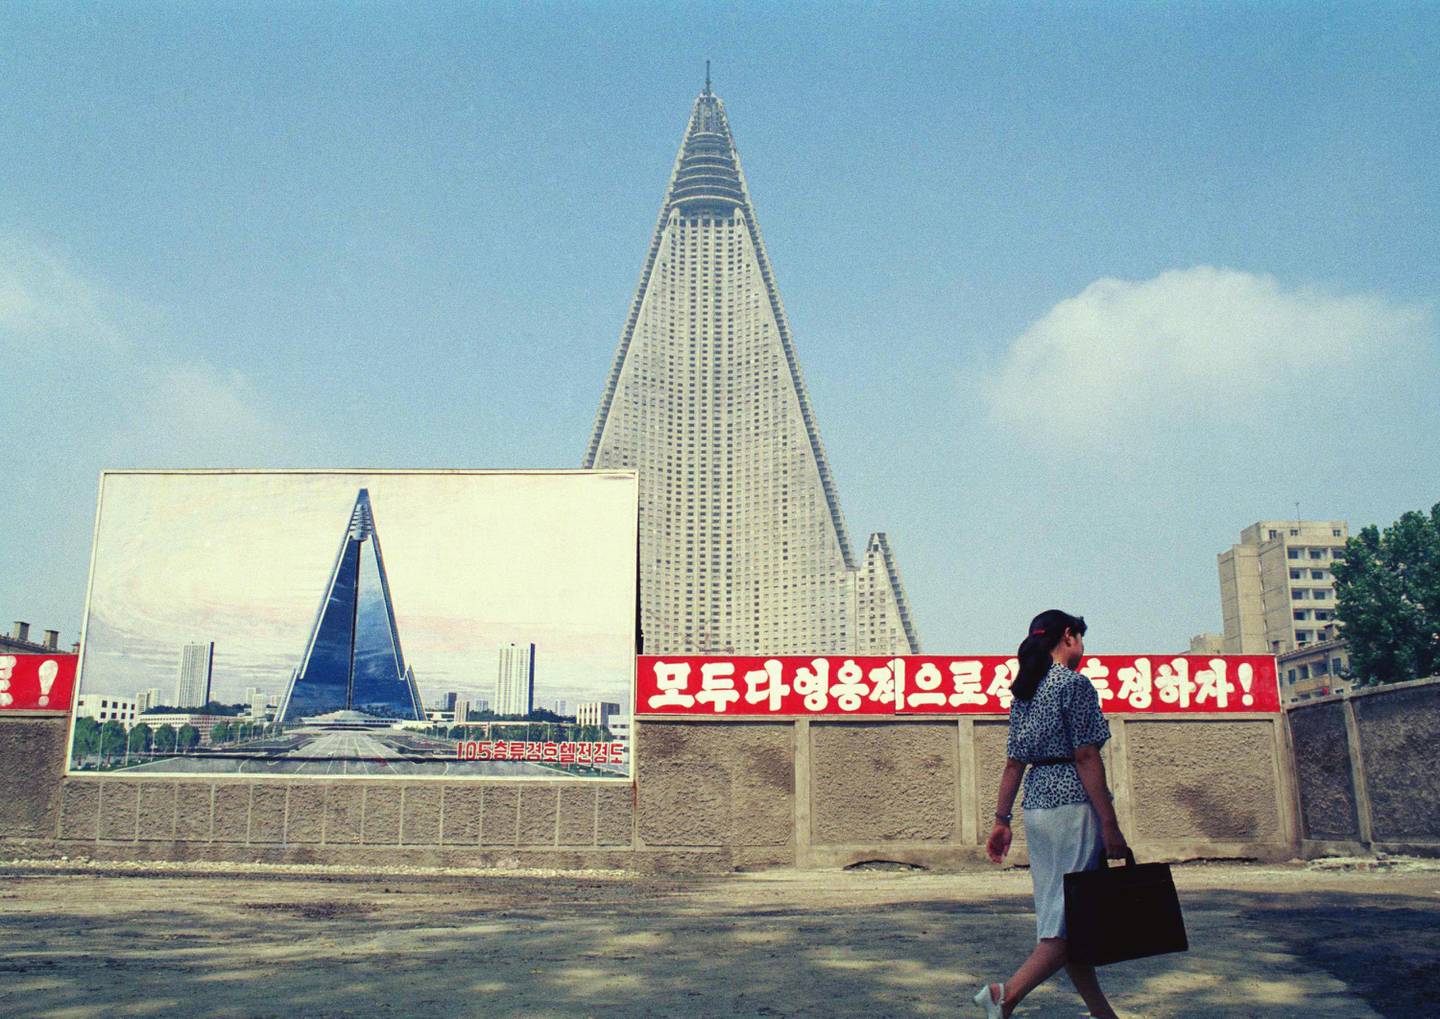 FILE - In this Aug. 22, 1990, file photo, a woman walks past the site of the Ryugyong Hotel under construction in Pyongyang, North Korea. Sign in red reads "Let's all together struggle heroically!" Walls set up to keep people out of a construction area around the gargantuan Ryugyong Hotel were pulled down in July 2017 as the North marked the anniversary of the Korean War armistice to reveal two broad new walkways leading to the building and the big red propaganda sign declaring that North Korea is a leading rocket power. (AP Photo/Vincent Yu, File)